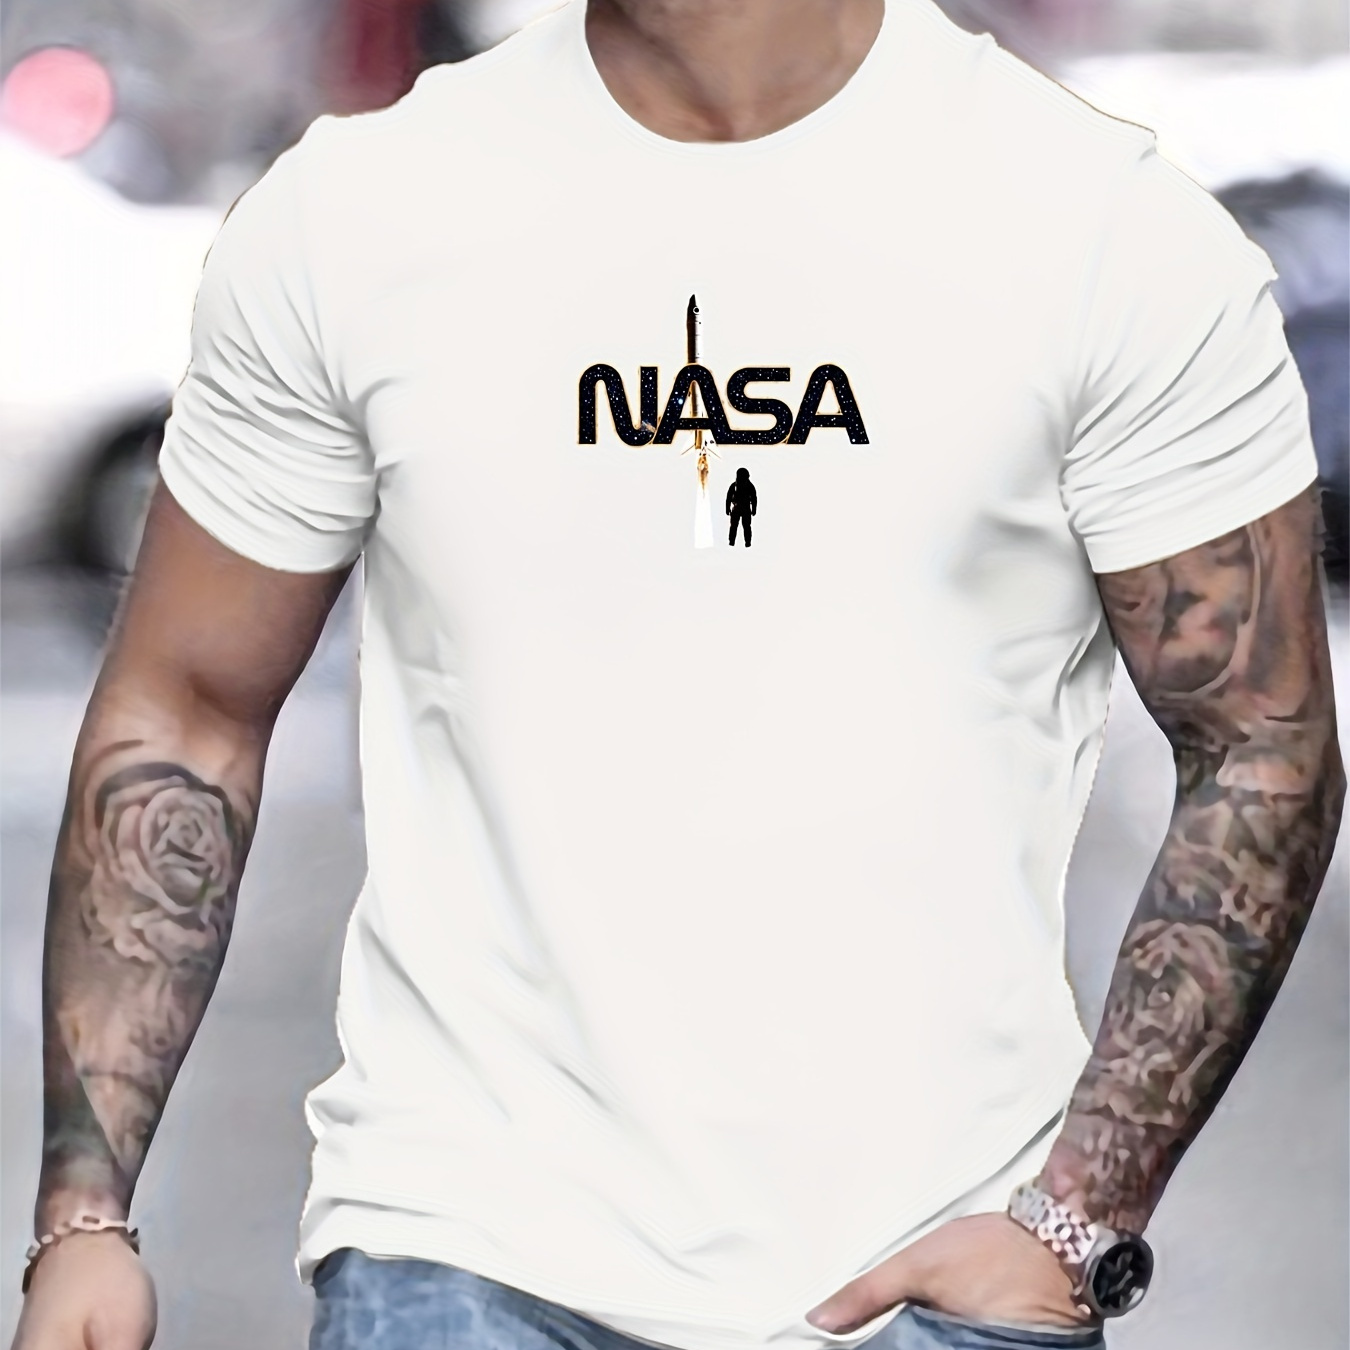 

Nasa, Tees For Men, Cool Casual Short Sleeve T-shirt For Summer And Spring